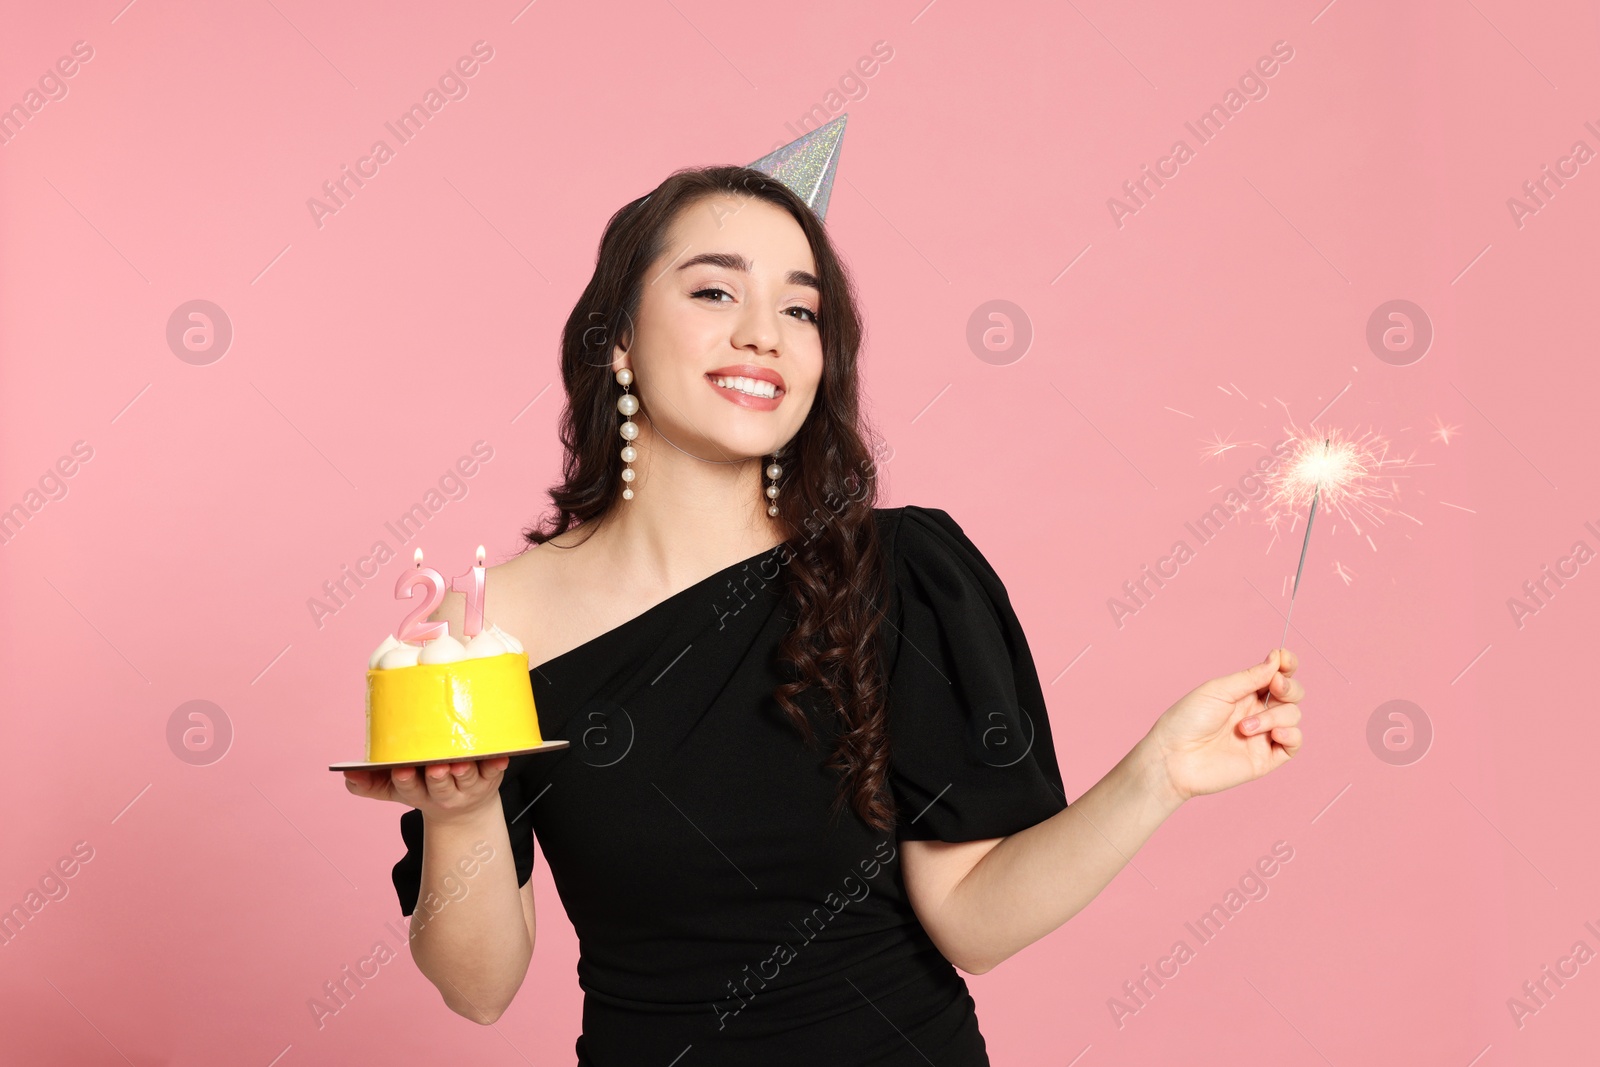 Photo of Coming of age party - 21st birthday. Smiling woman holding delicious cake with number shaped candles and sparkler on pink background